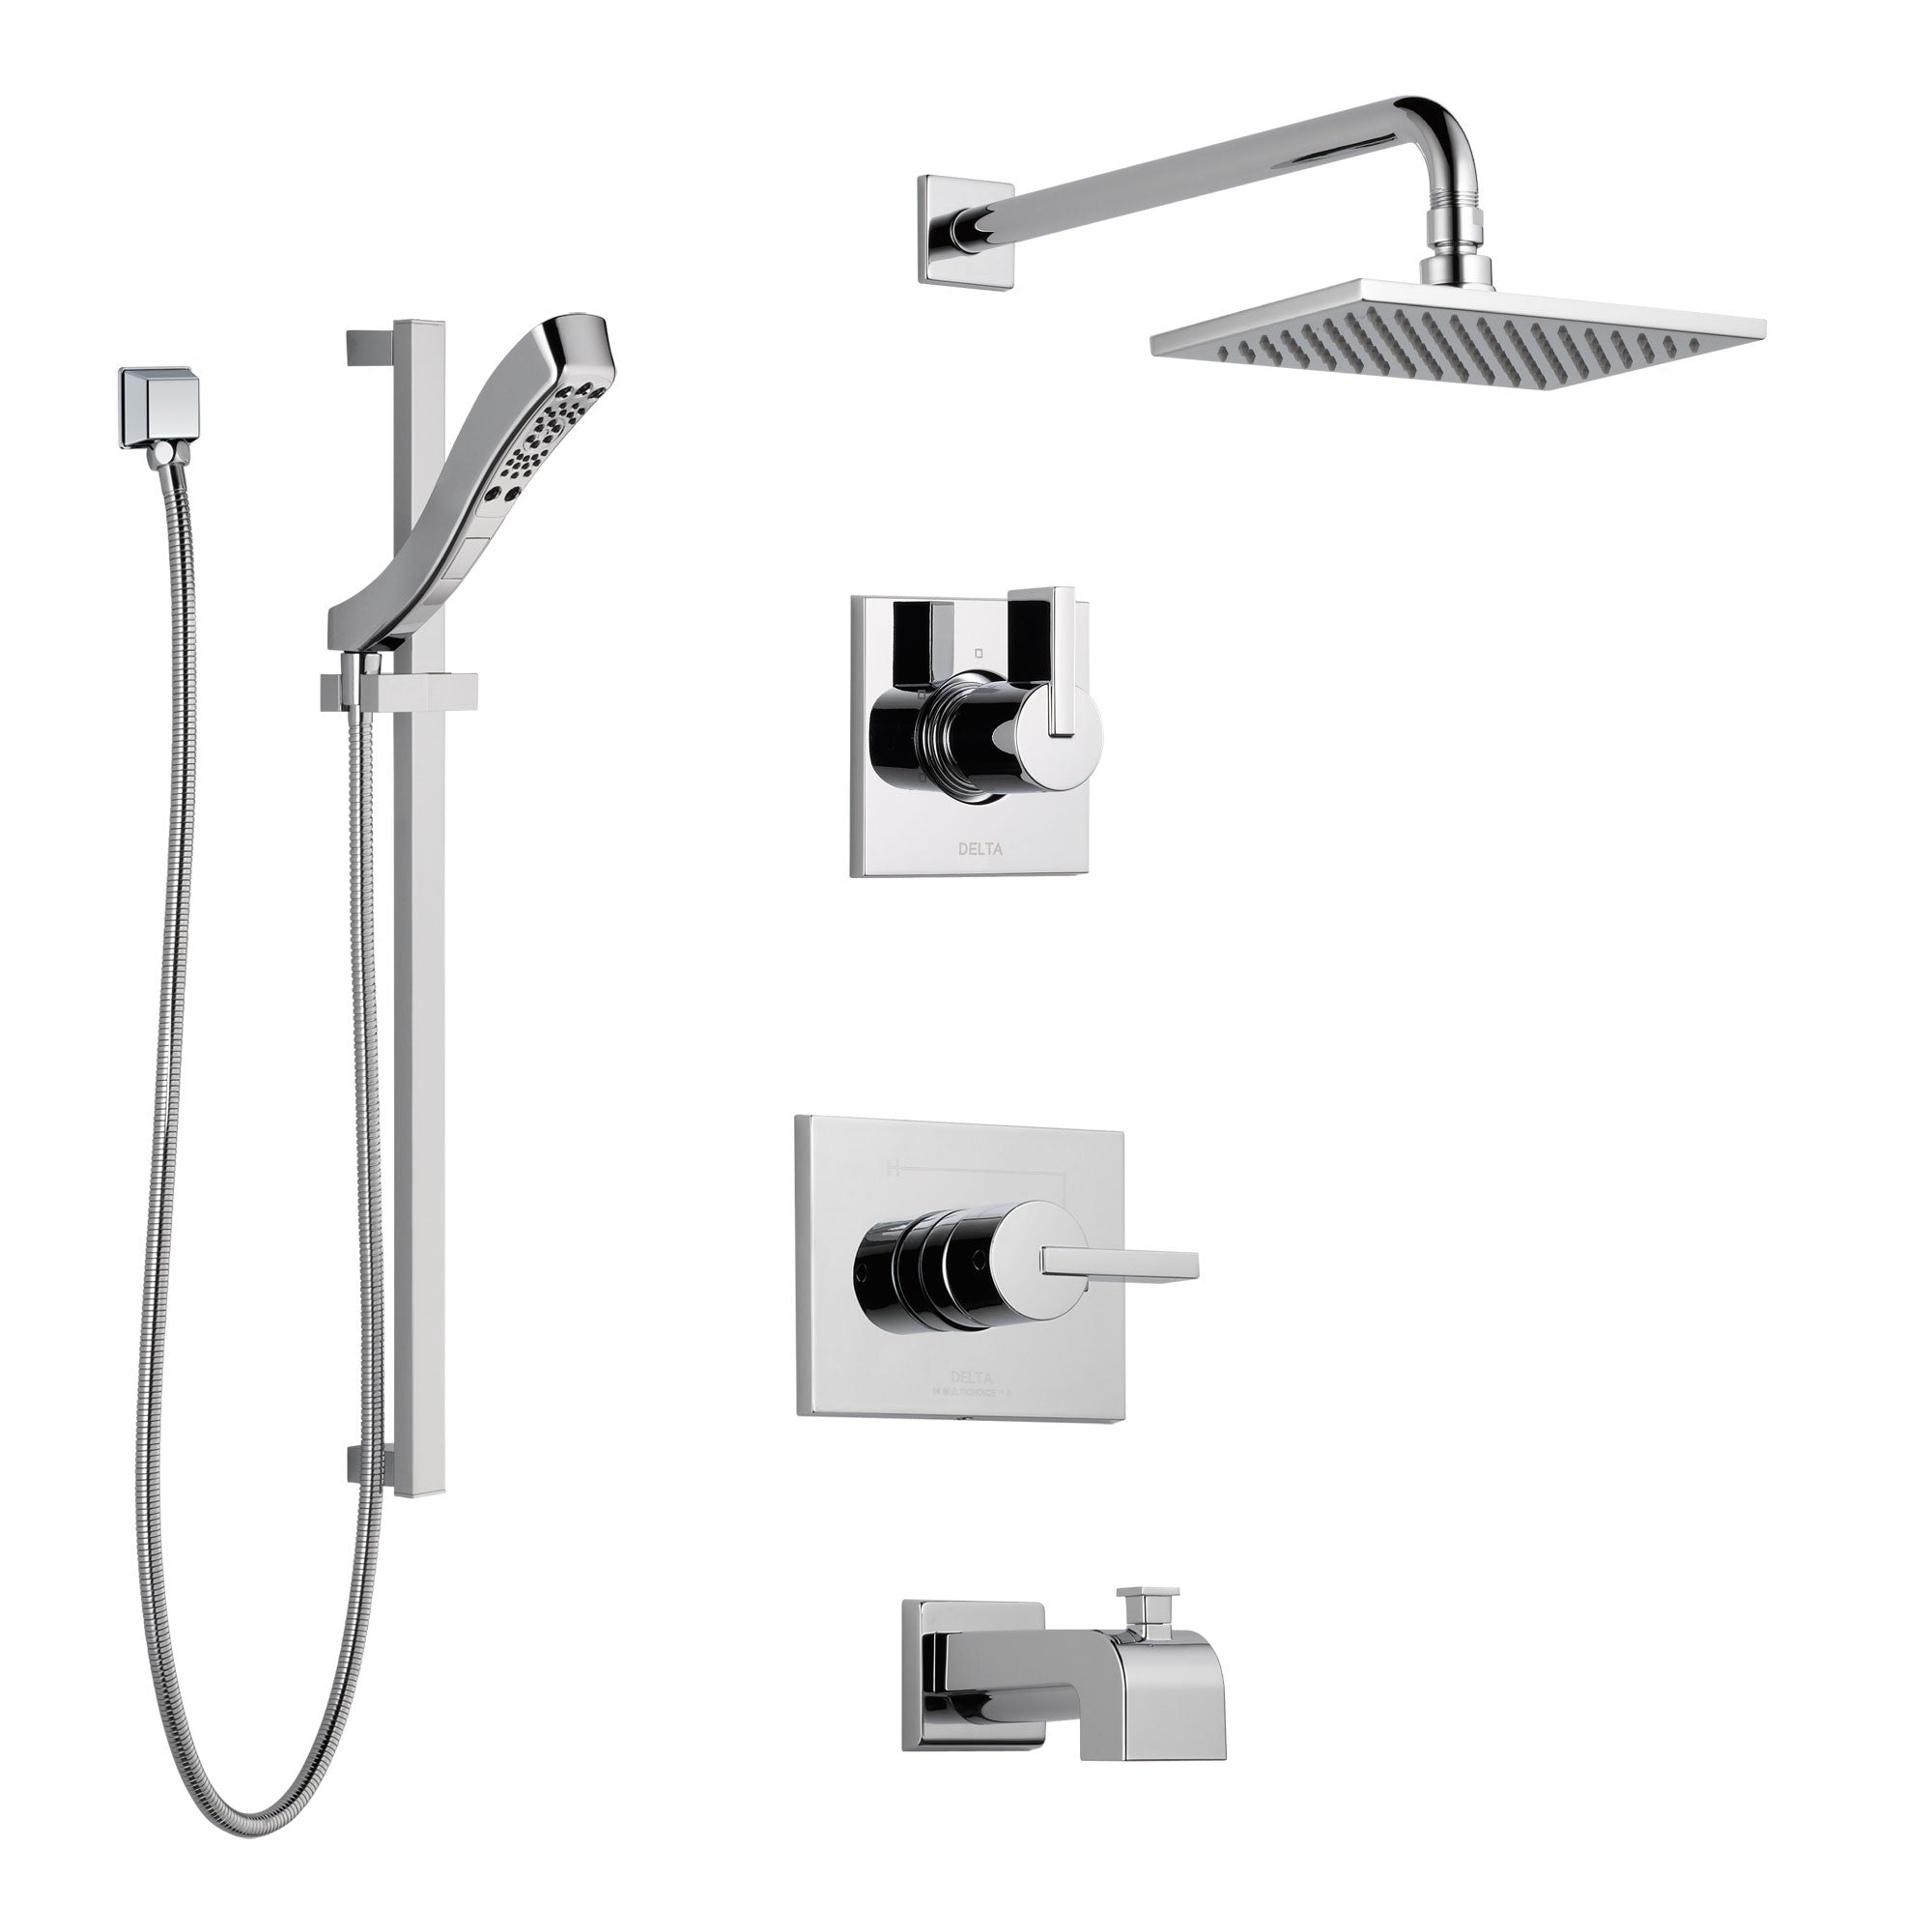 Delta Vero Chrome Finish Tub and Shower System with Control Handle, 3-Setting Diverter, Showerhead, and Hand Shower with Slidebar SS1445326